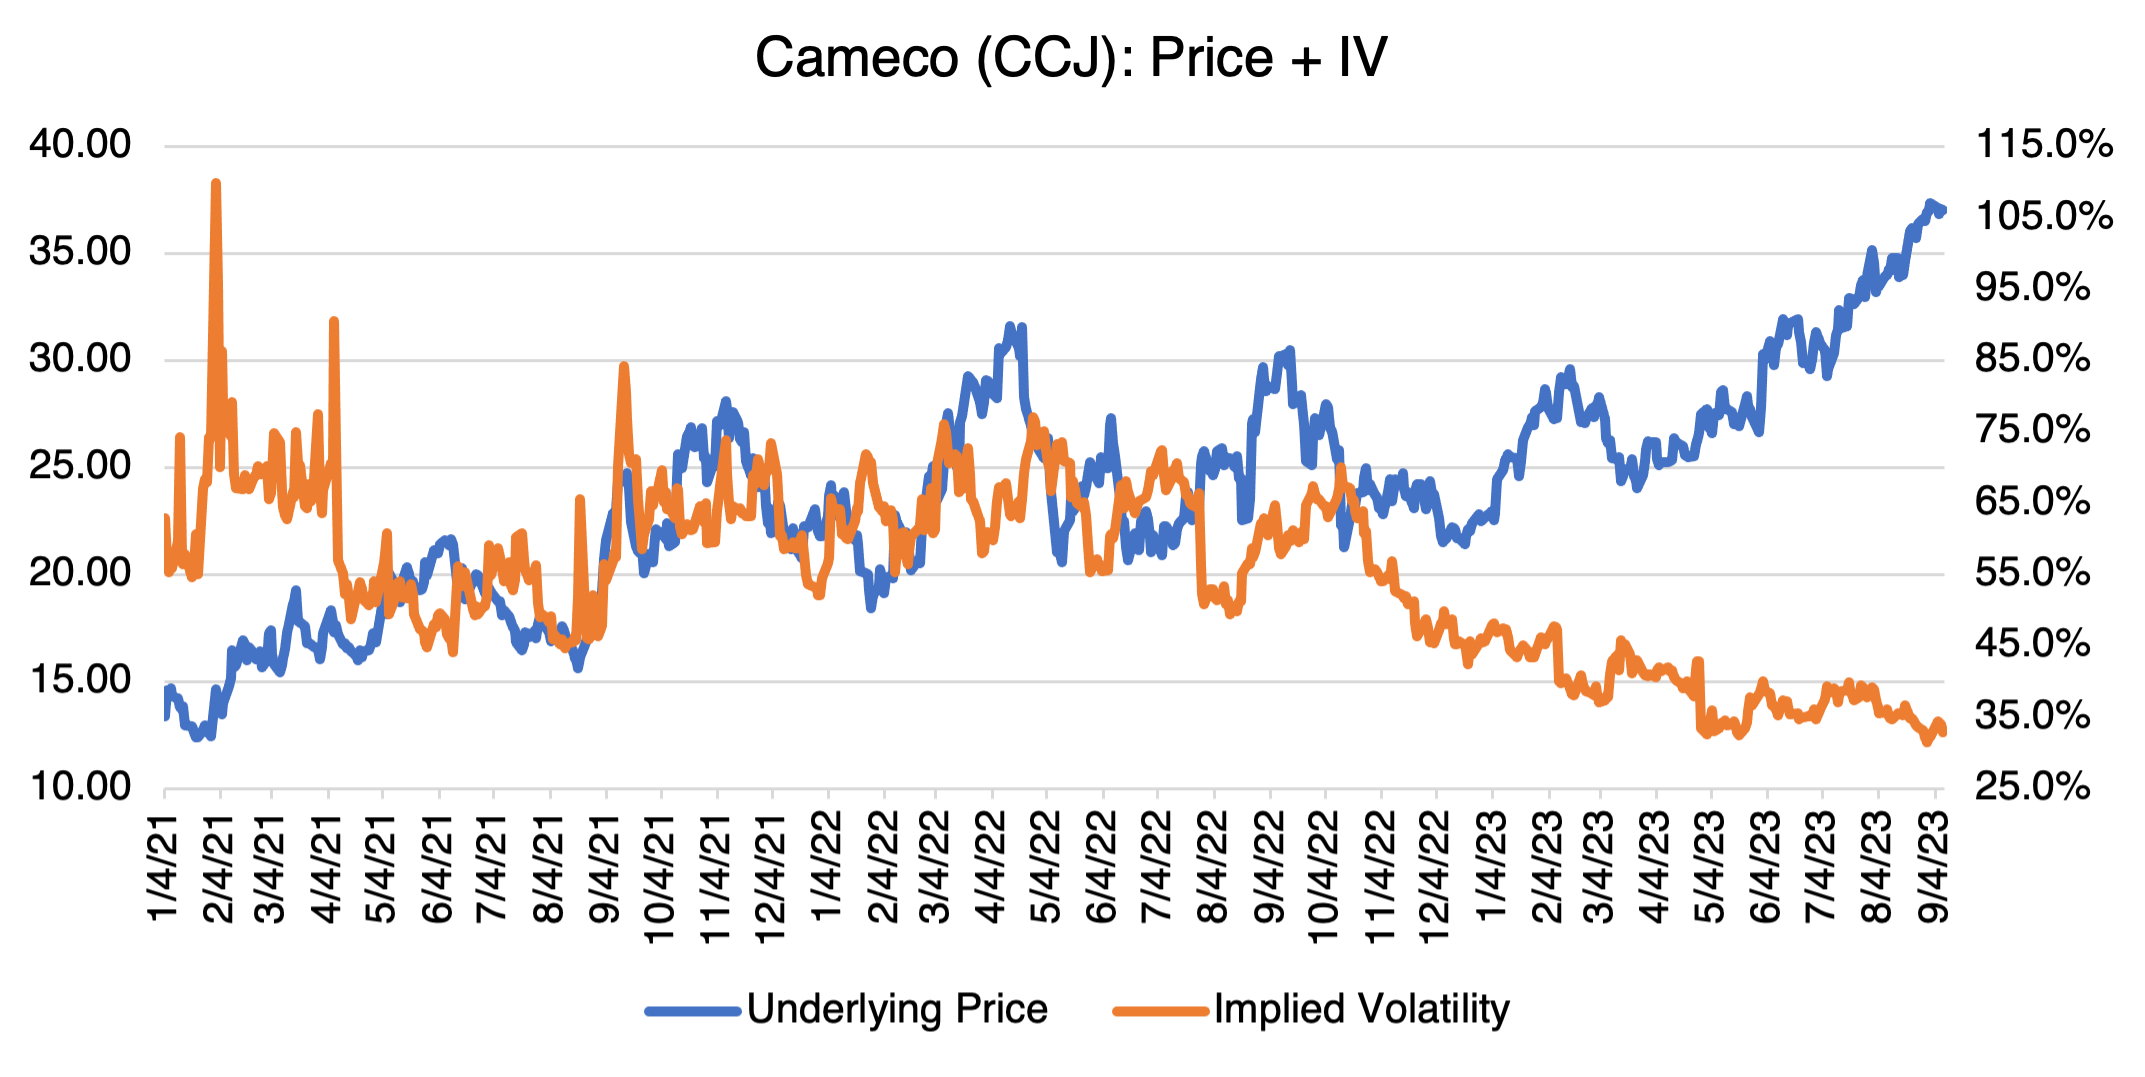 Cameco Price + IV Chart